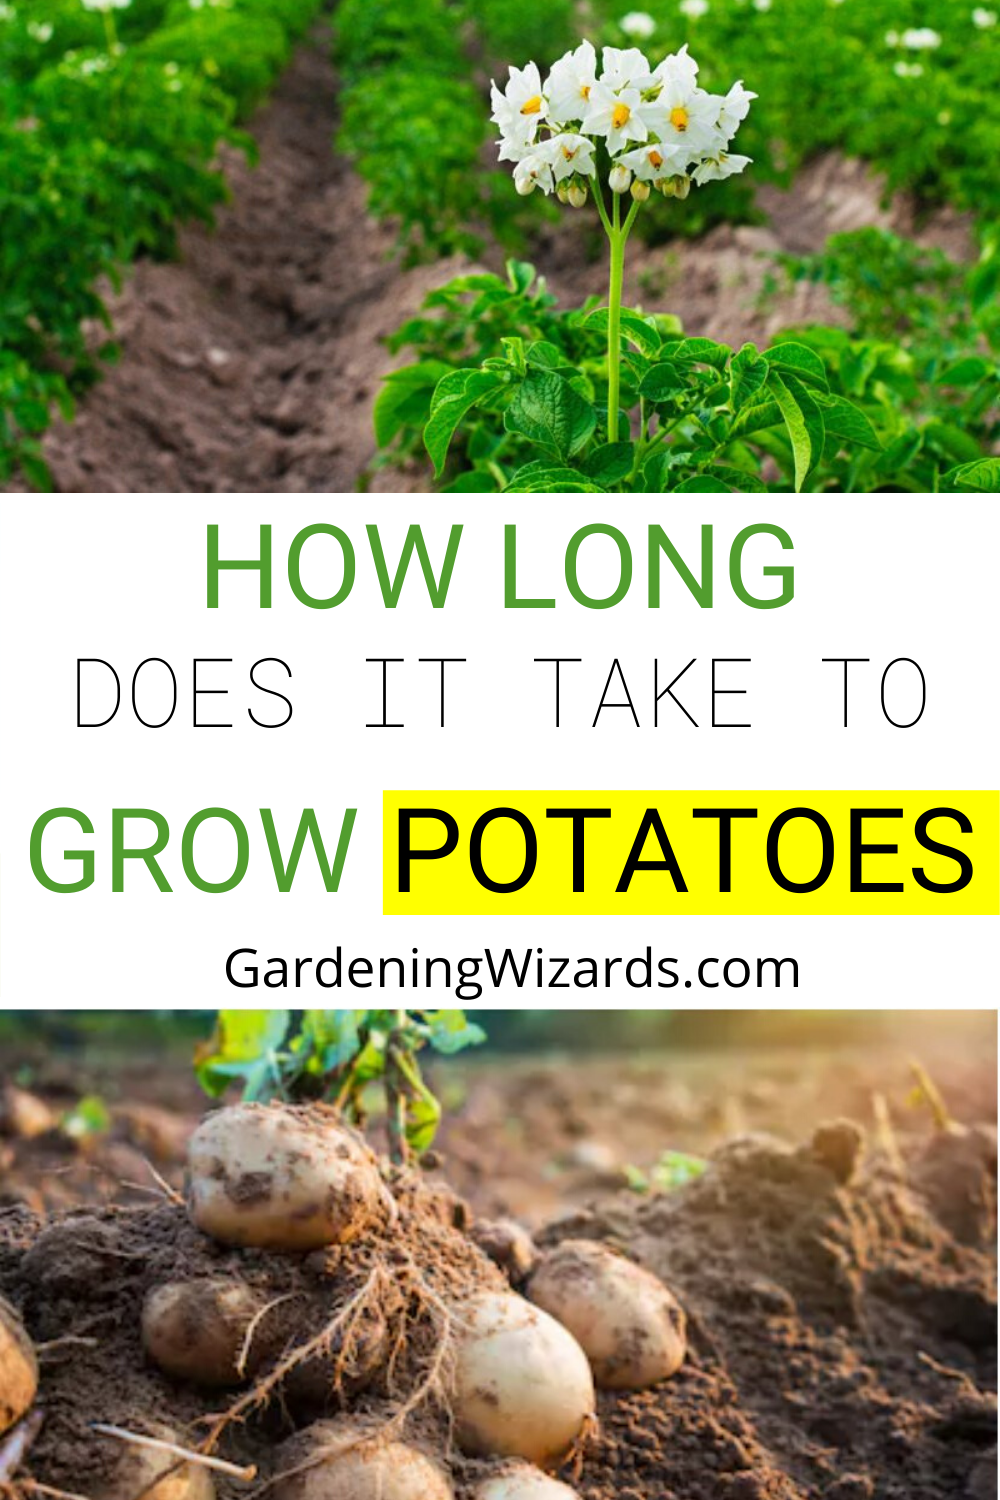 How long does it take to grow potatoes